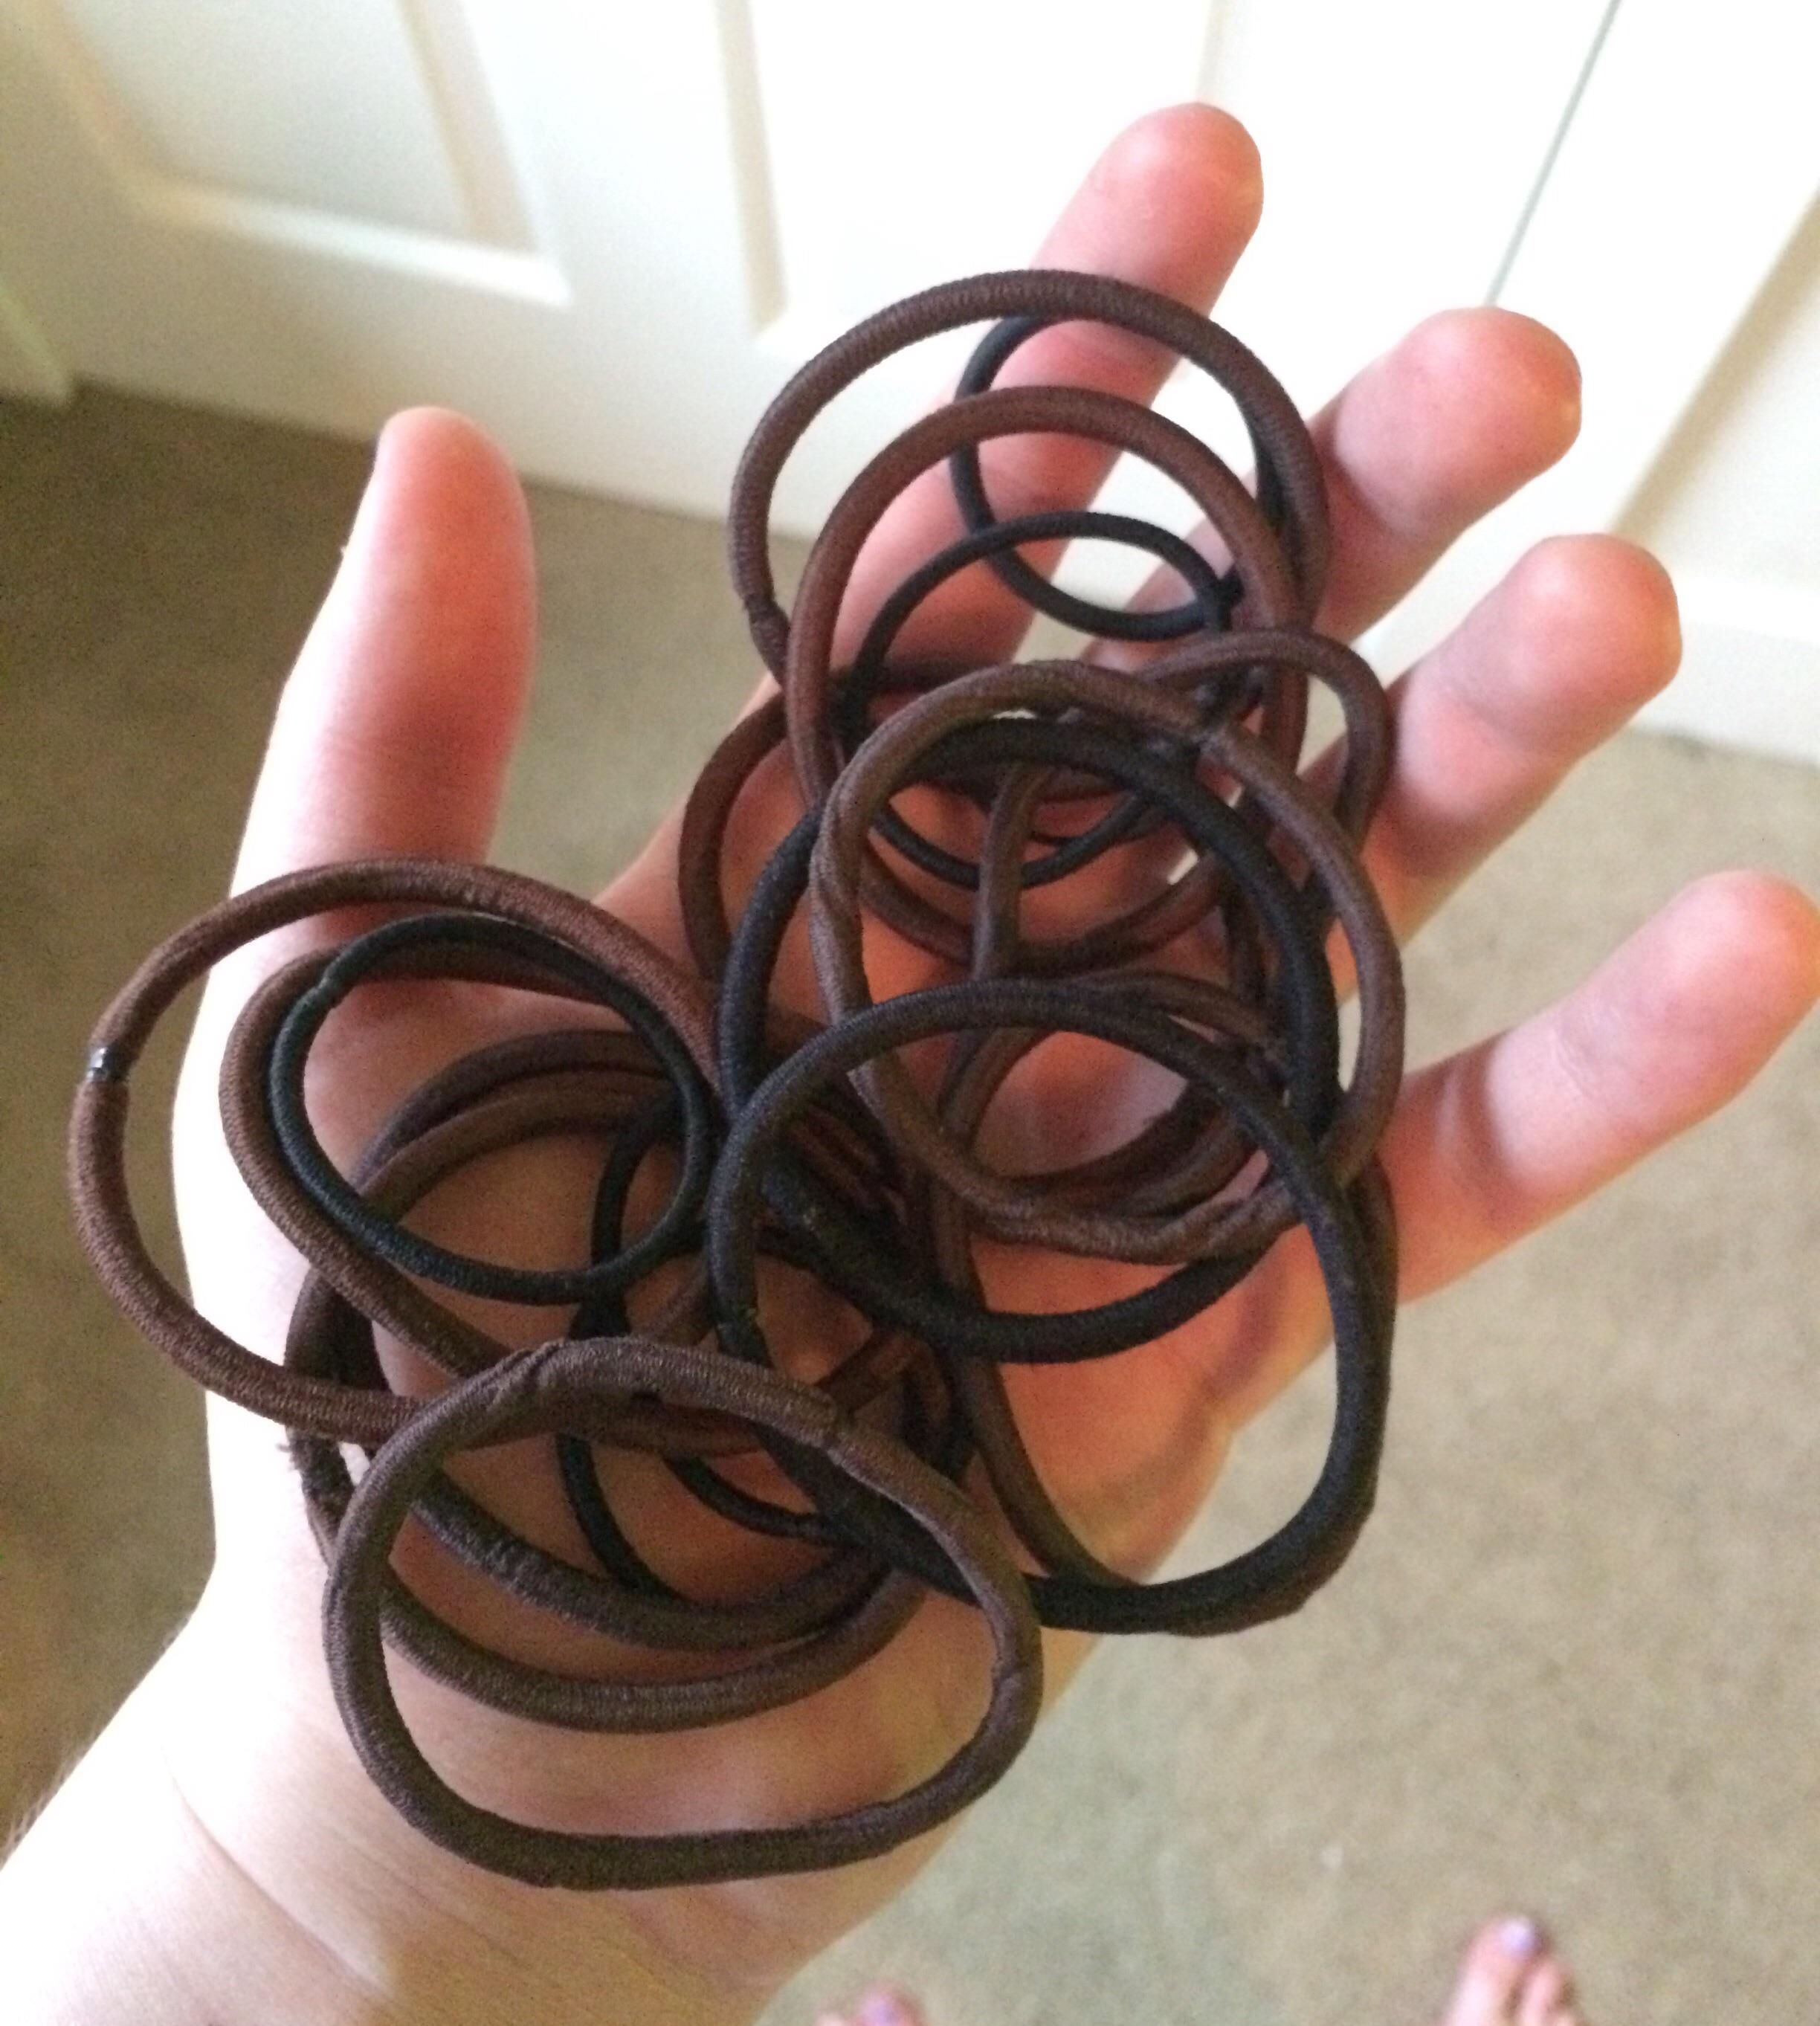 I was running low on hair ties and asked my mom if she could pick some up next time she goes to the store. She said "Clean your room, first," so I did. Touché, Mom, touché.